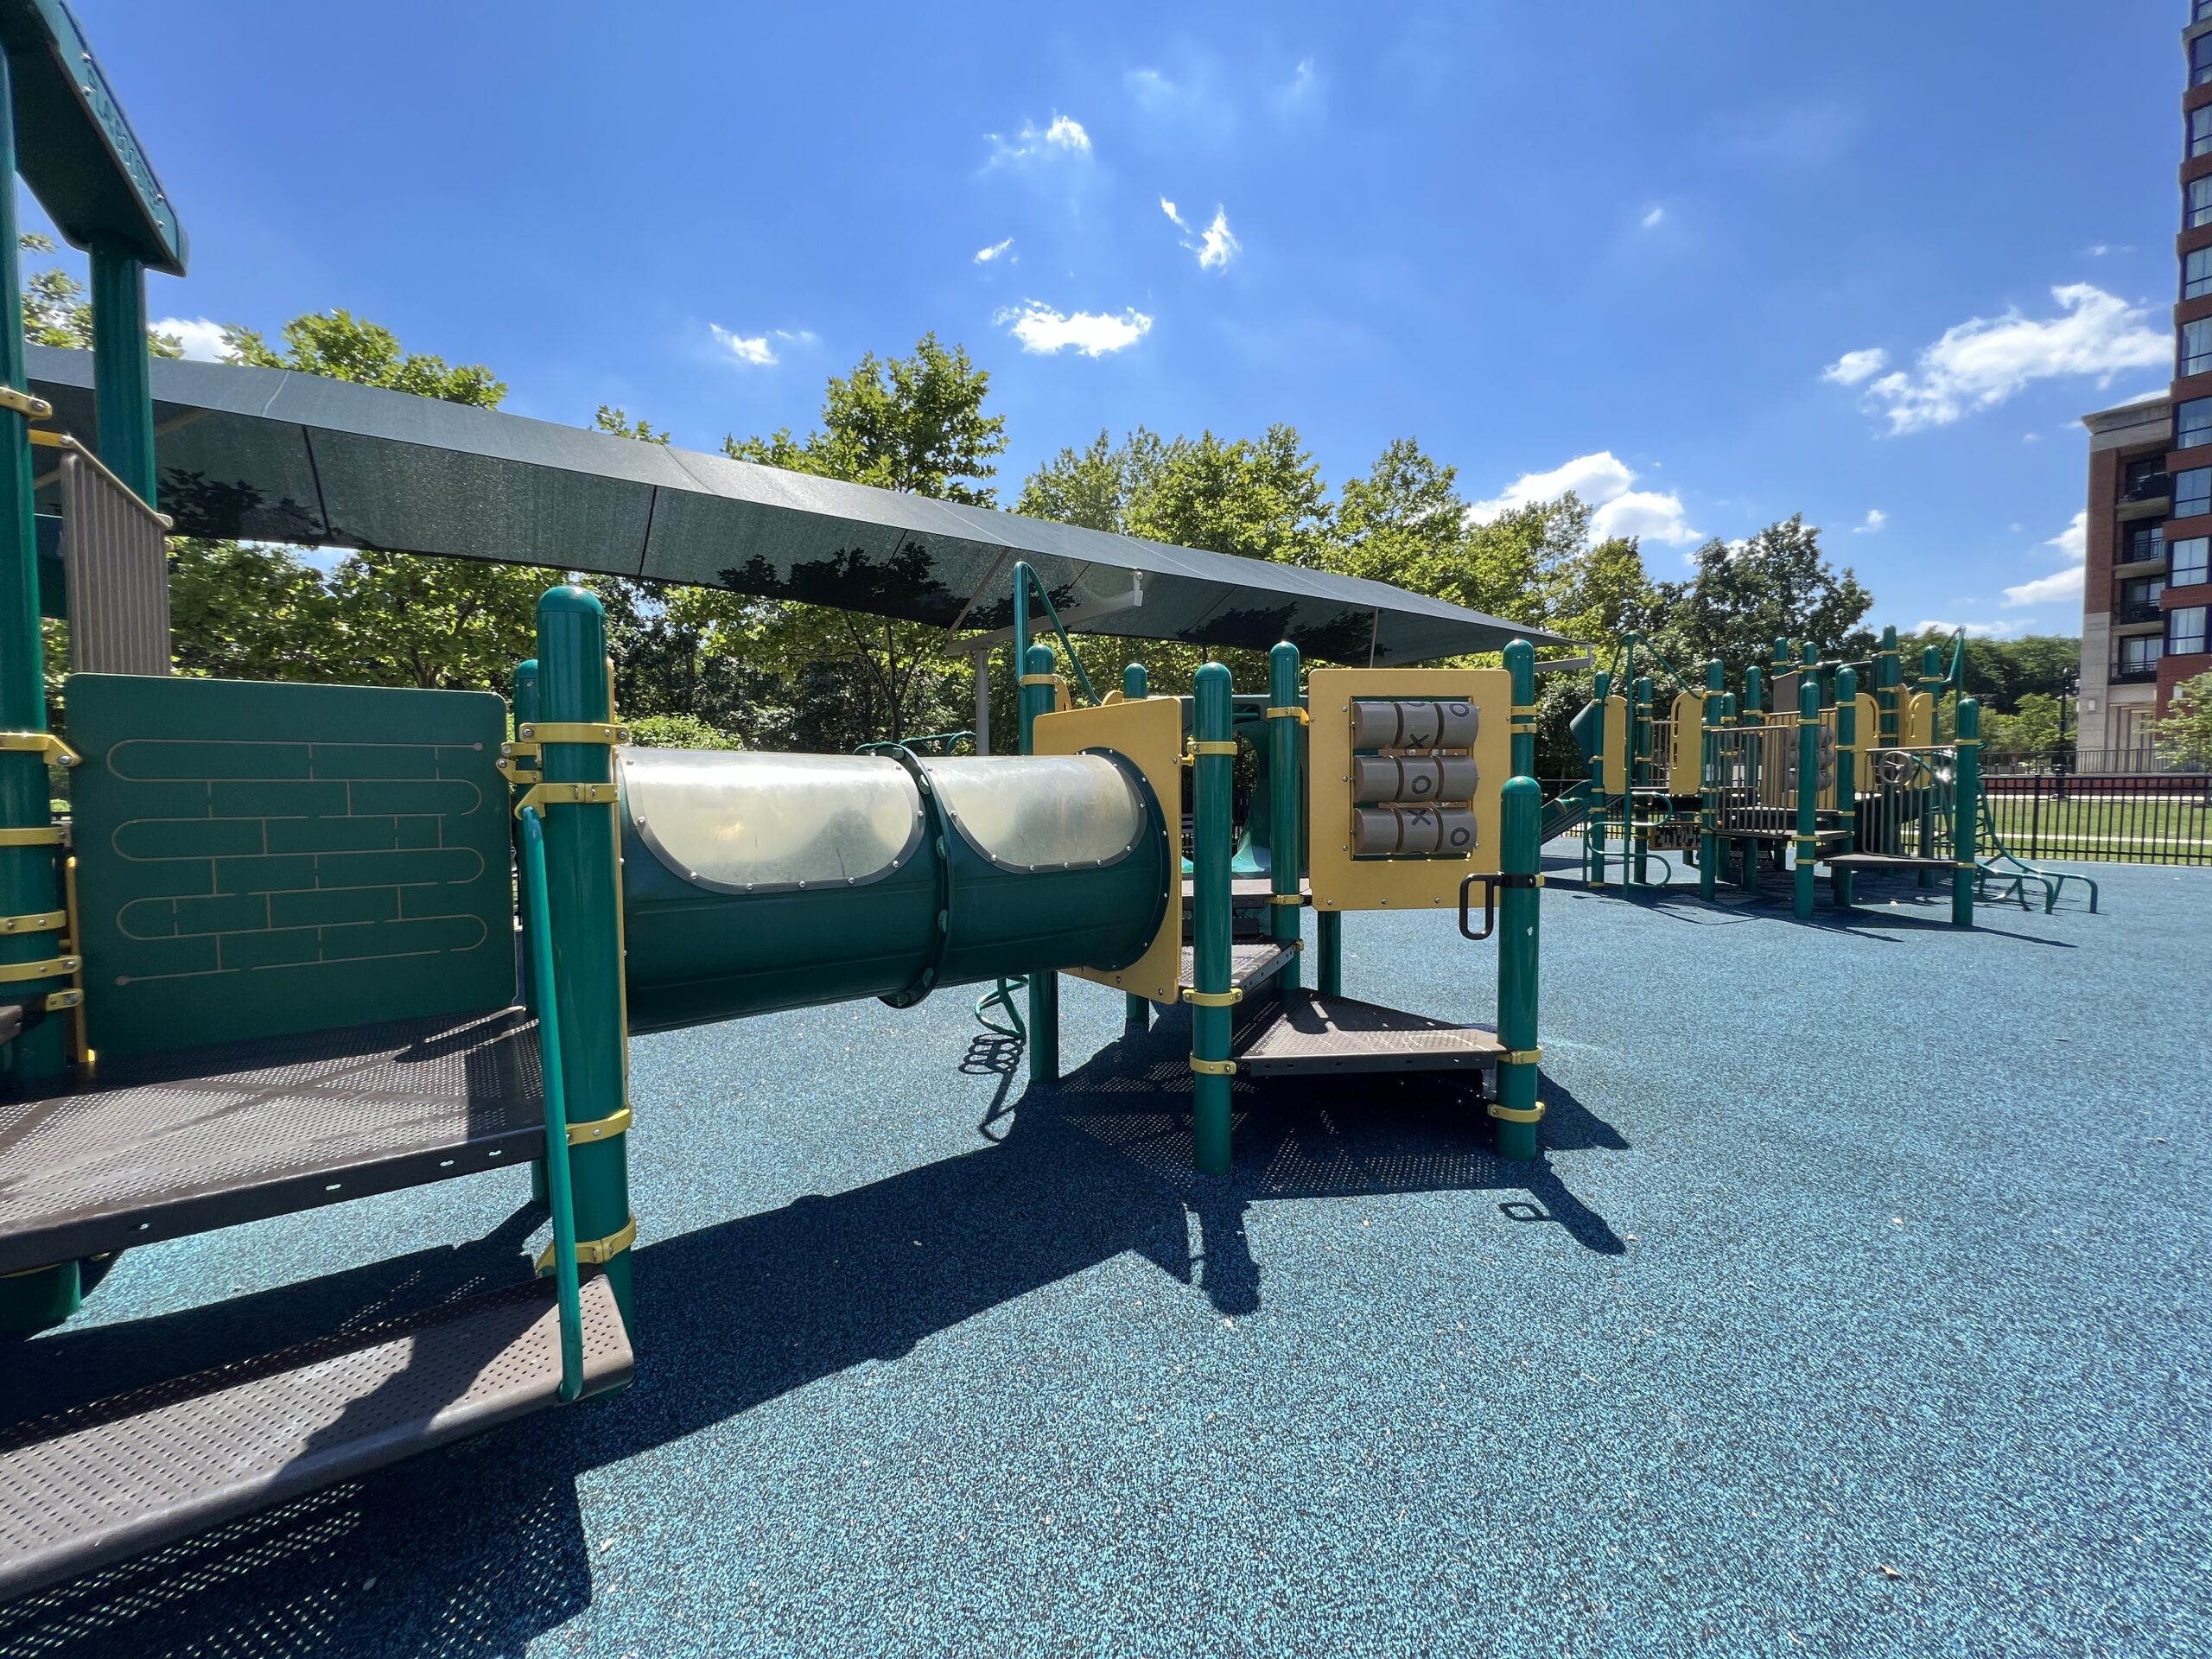 Maxwell Place Park Playground in Hoboken NJ - FEATURES - tunnel and tic tac toe board